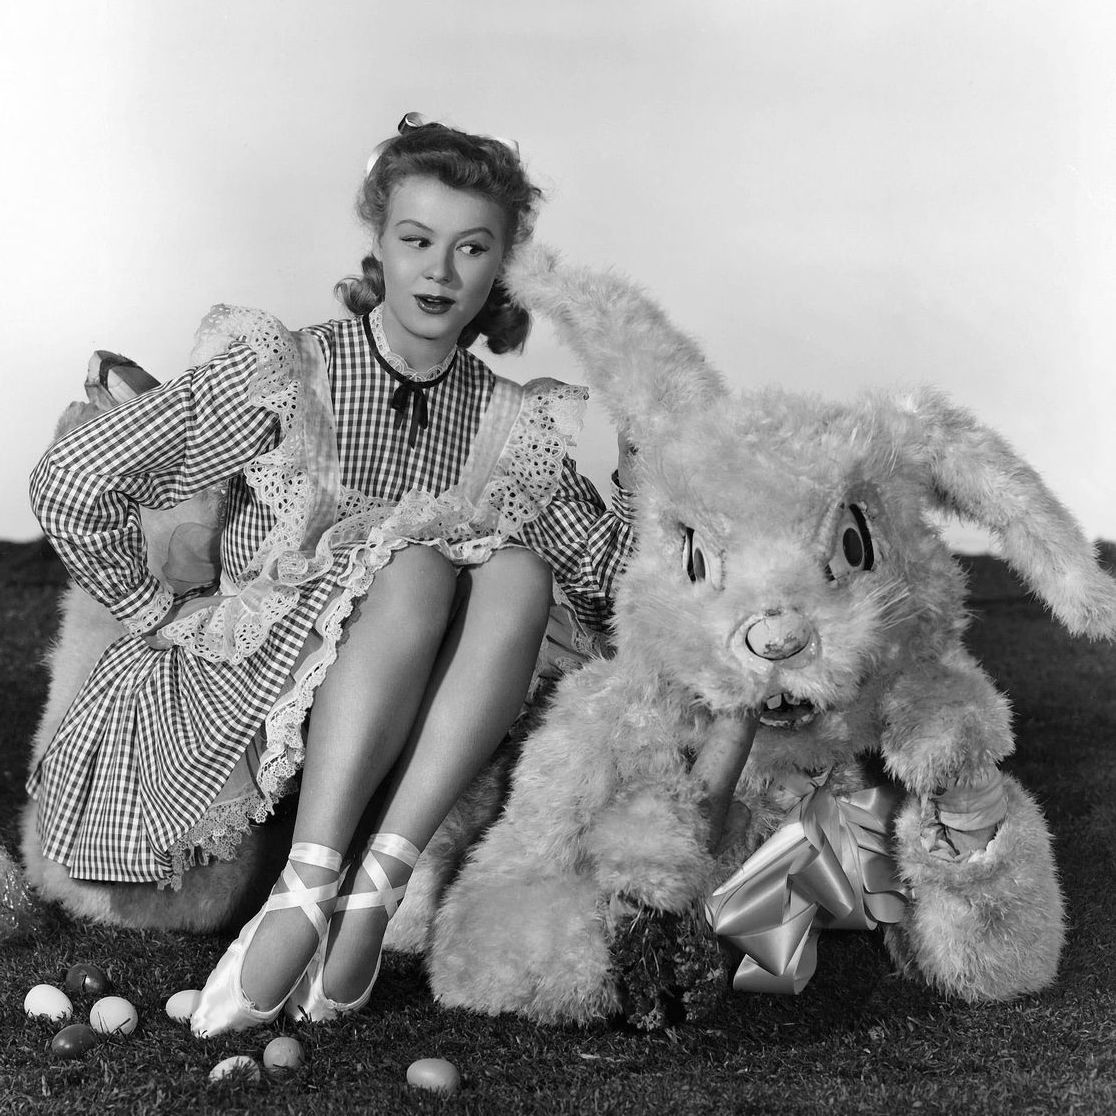 Black And White Vintage Portn - Vintage Hollywood Stars Dressed-Up as Easter Bunnies - And Why They Did It  - Flashbak